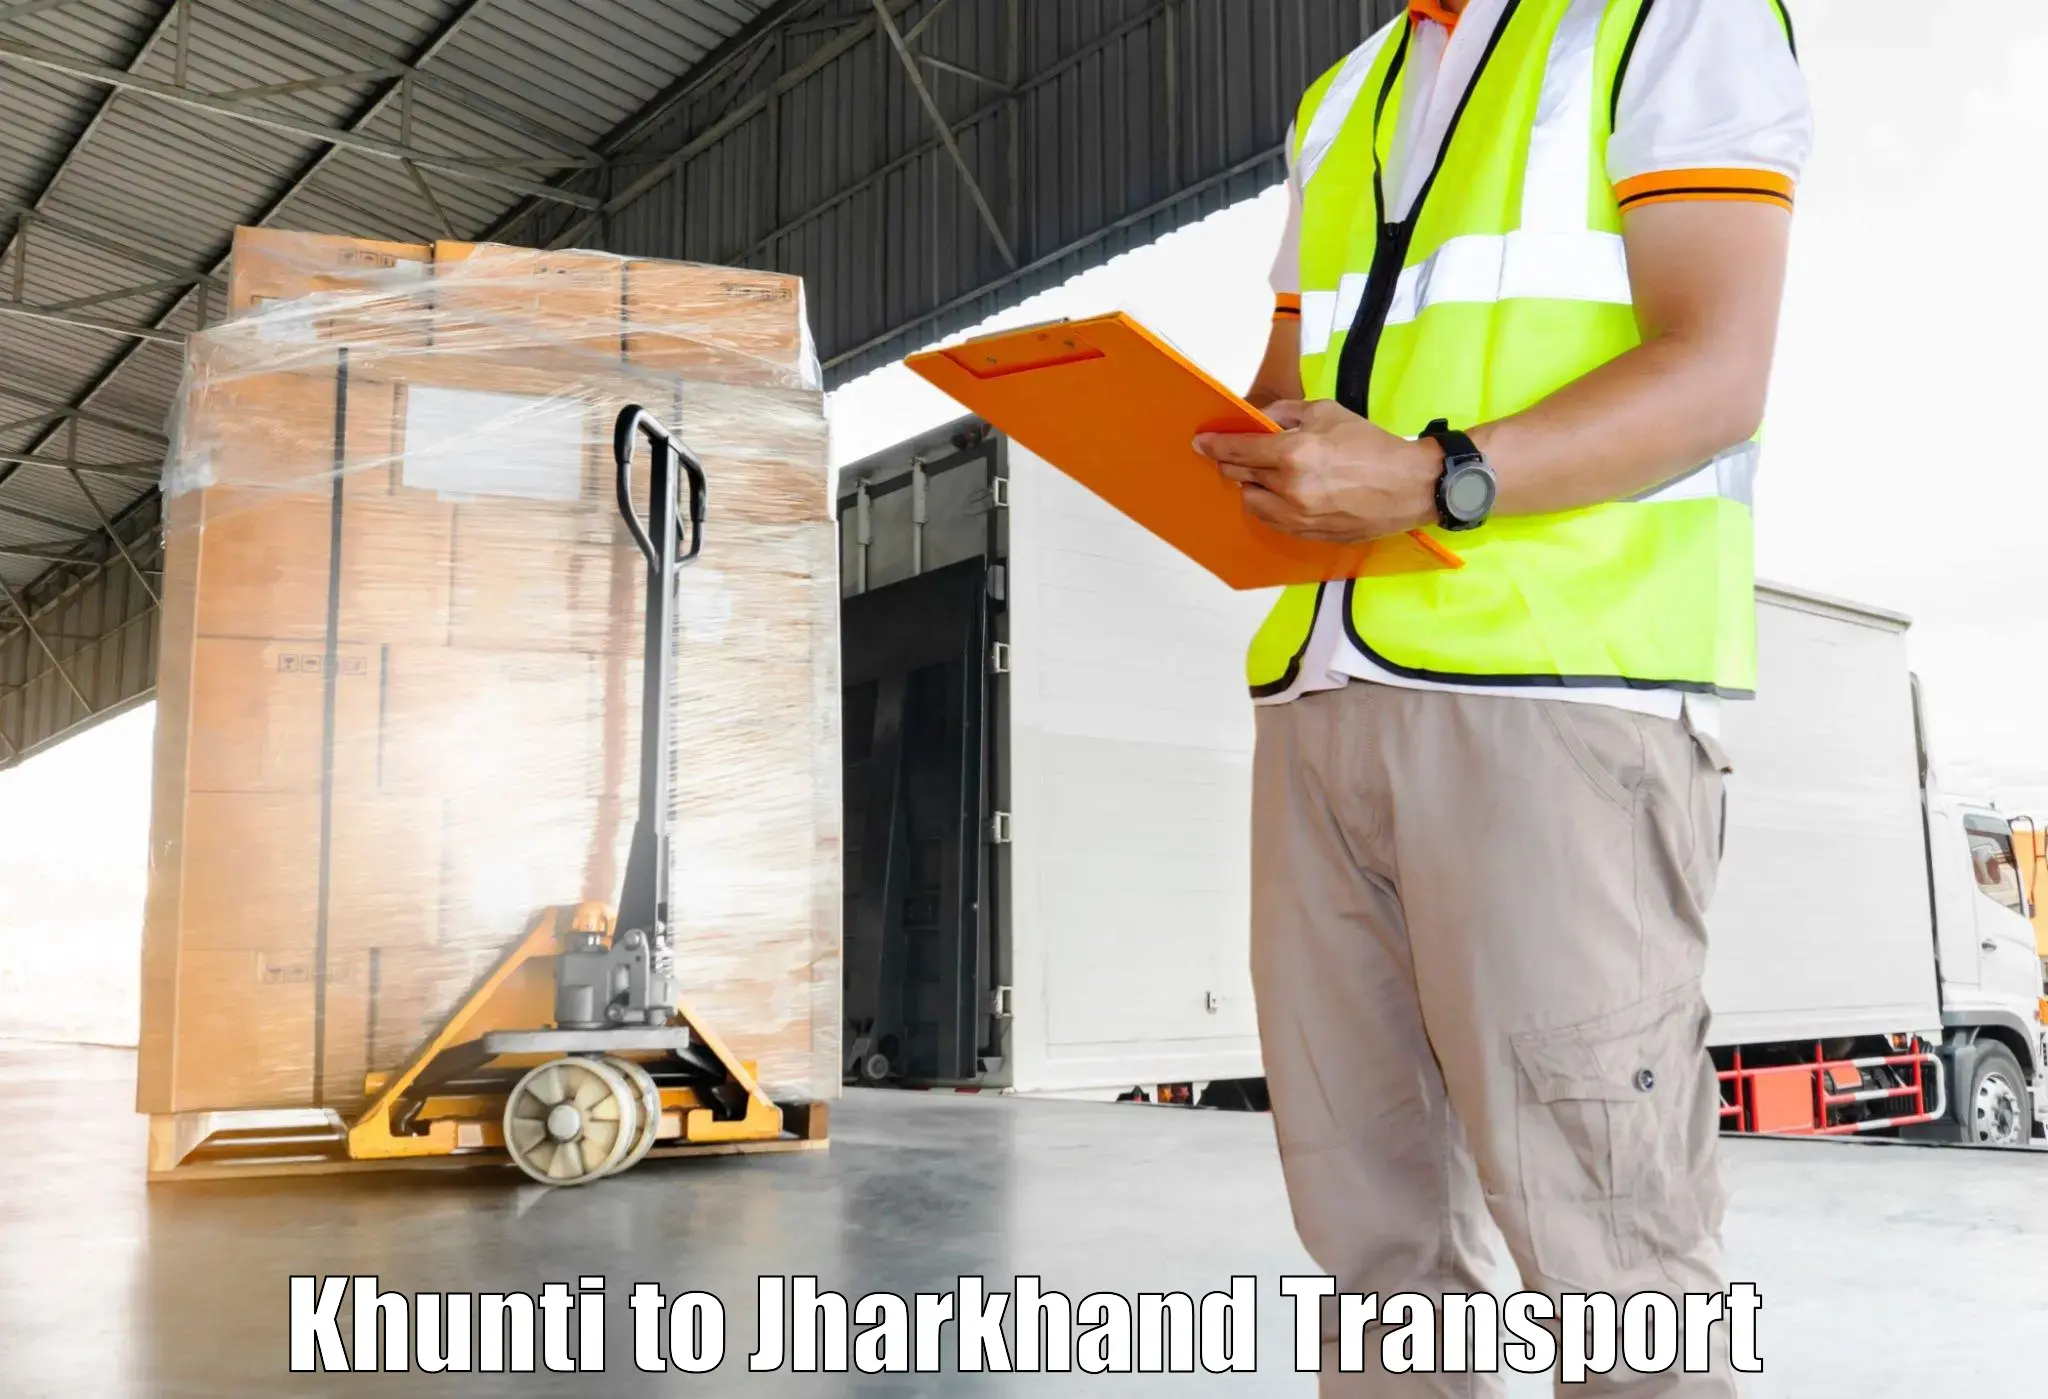 Delivery service Khunti to Jamshedpur